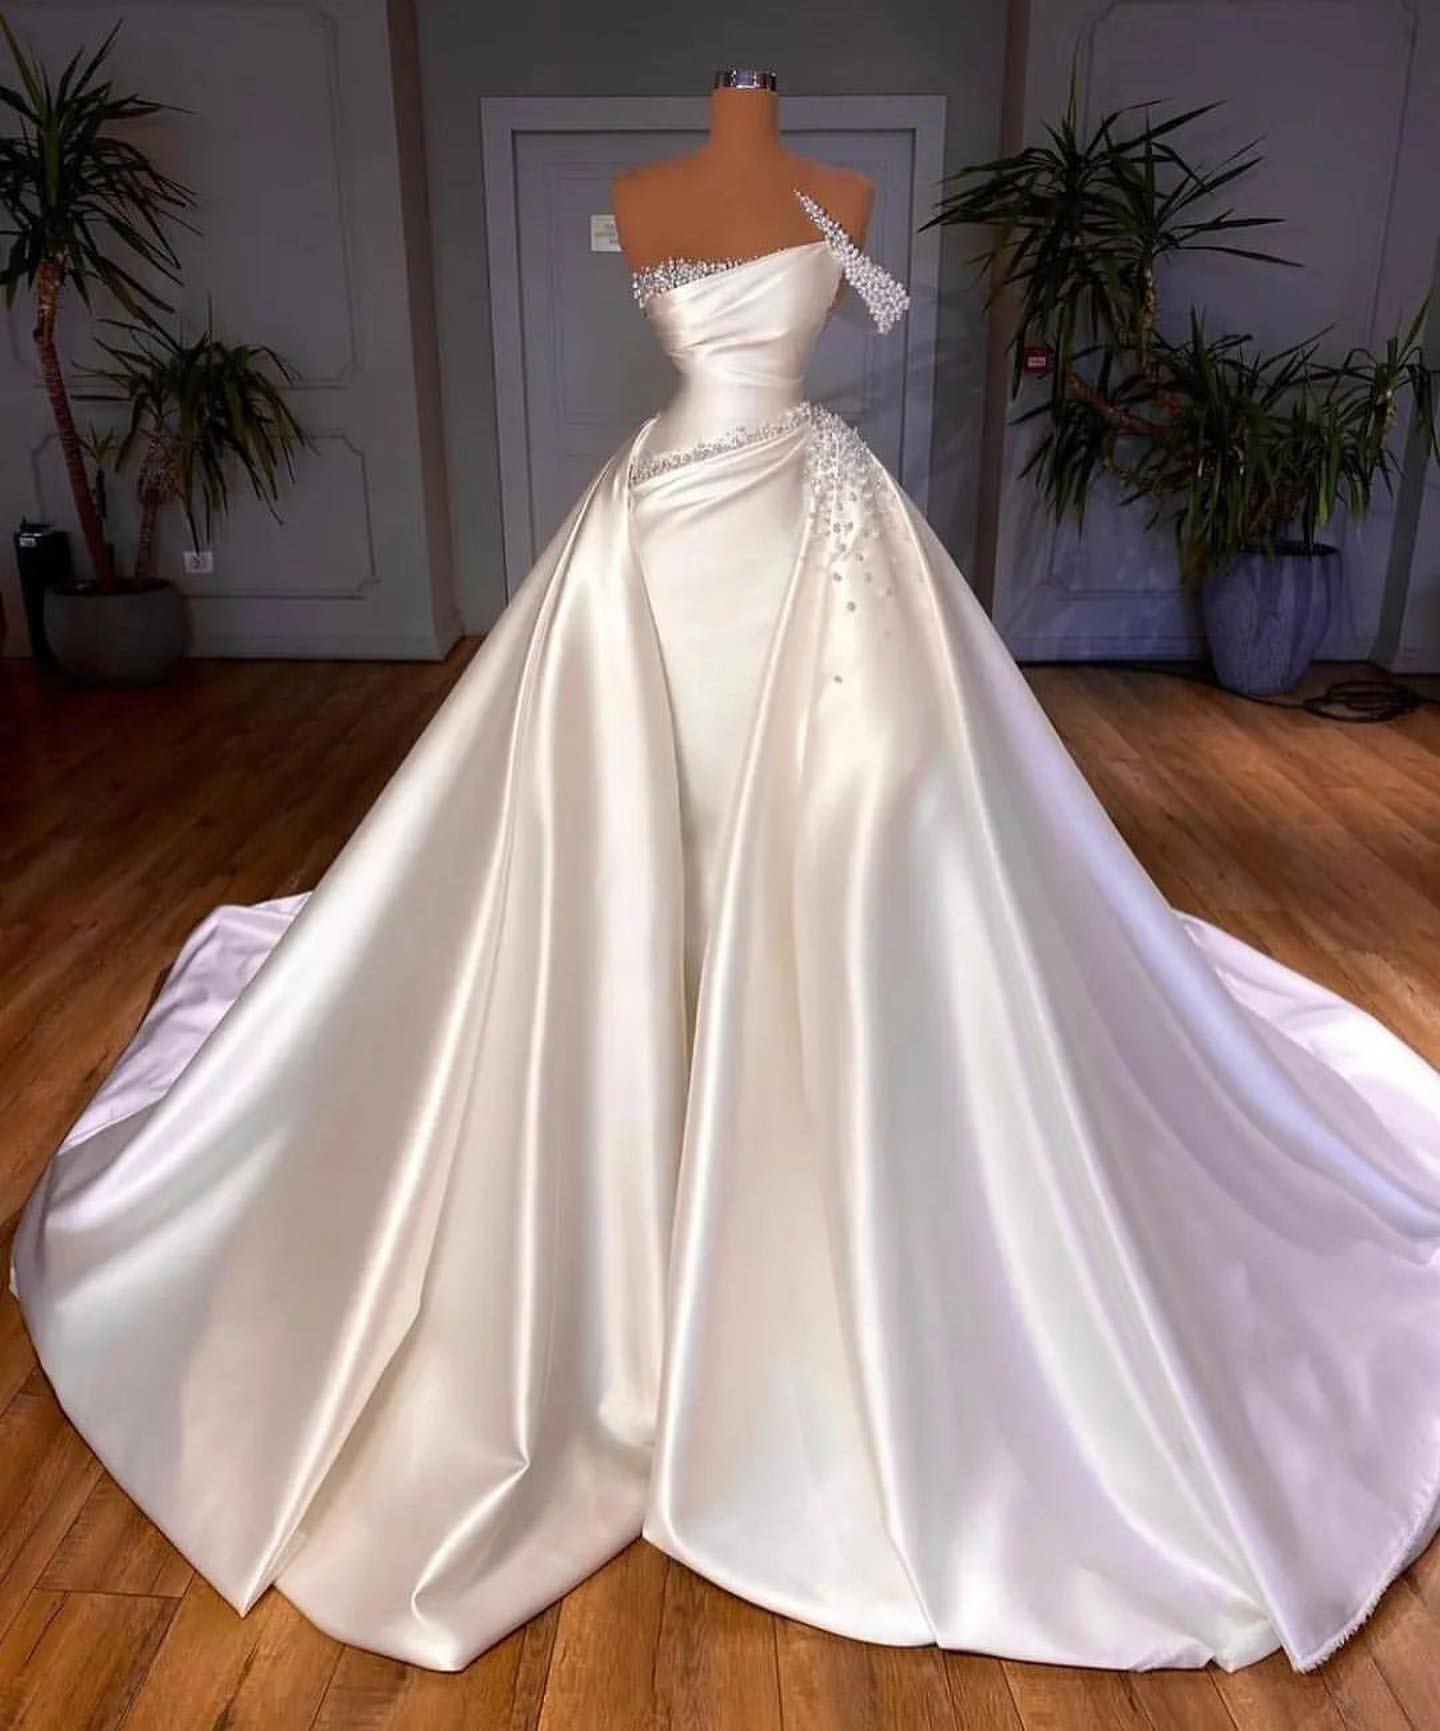 Luluslly Strapless Mermaid Wedding Dress Overskirt Long With Pearls Online